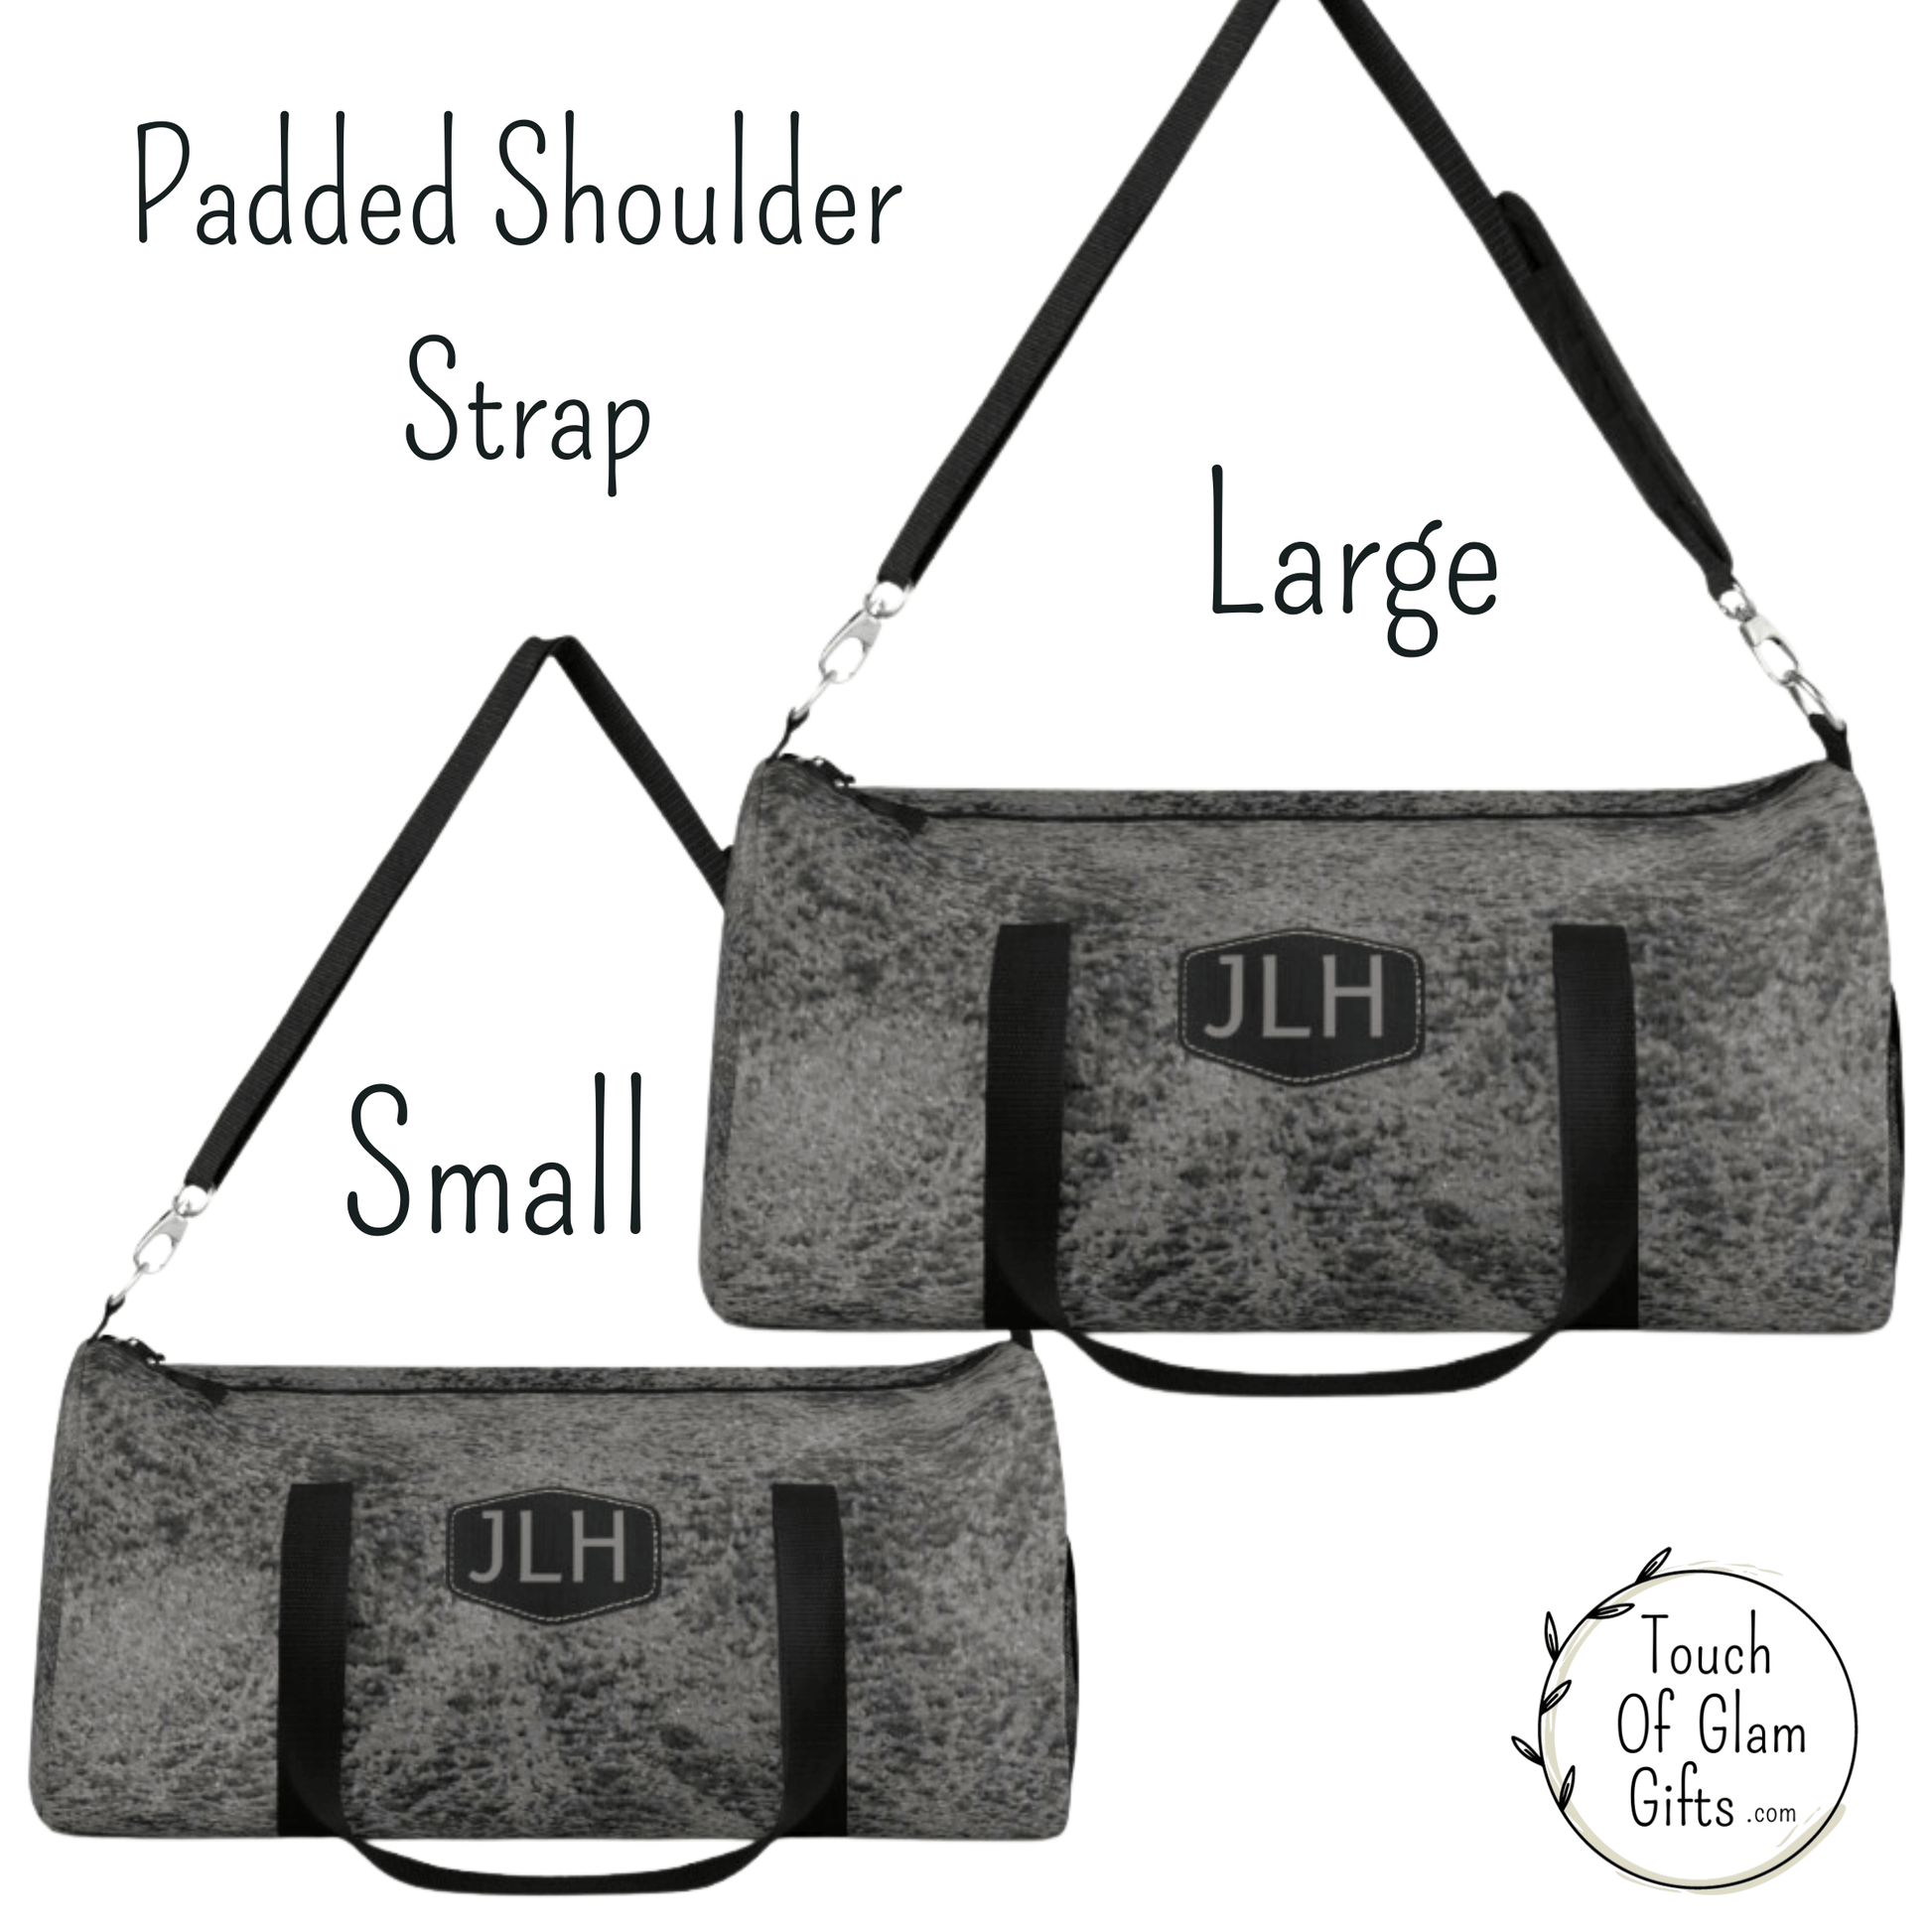 A close up view of the large and small duffel bag in grey shows the quality built bags and the metal hardware and the padded shoulder strap.